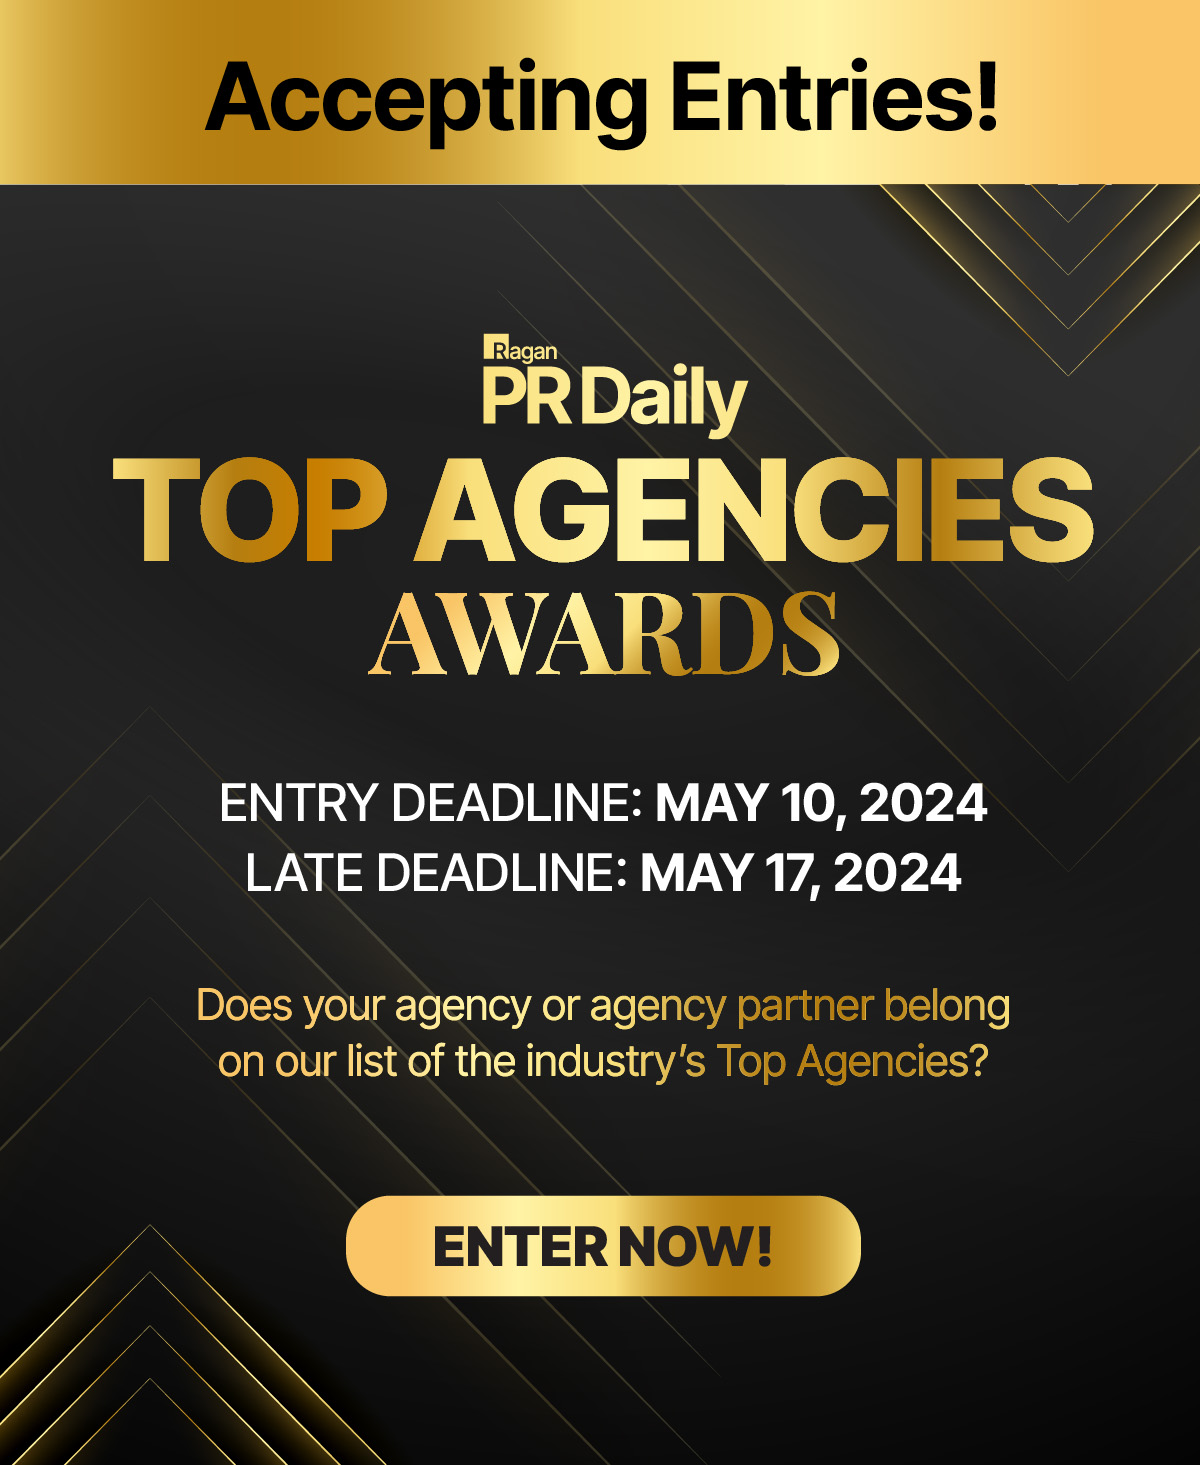 Ragan PR Daily Top Agencies Awards | Entry Deadline: May 10, 2024 | Late Deadline: May 17, 2024 | Enter Now